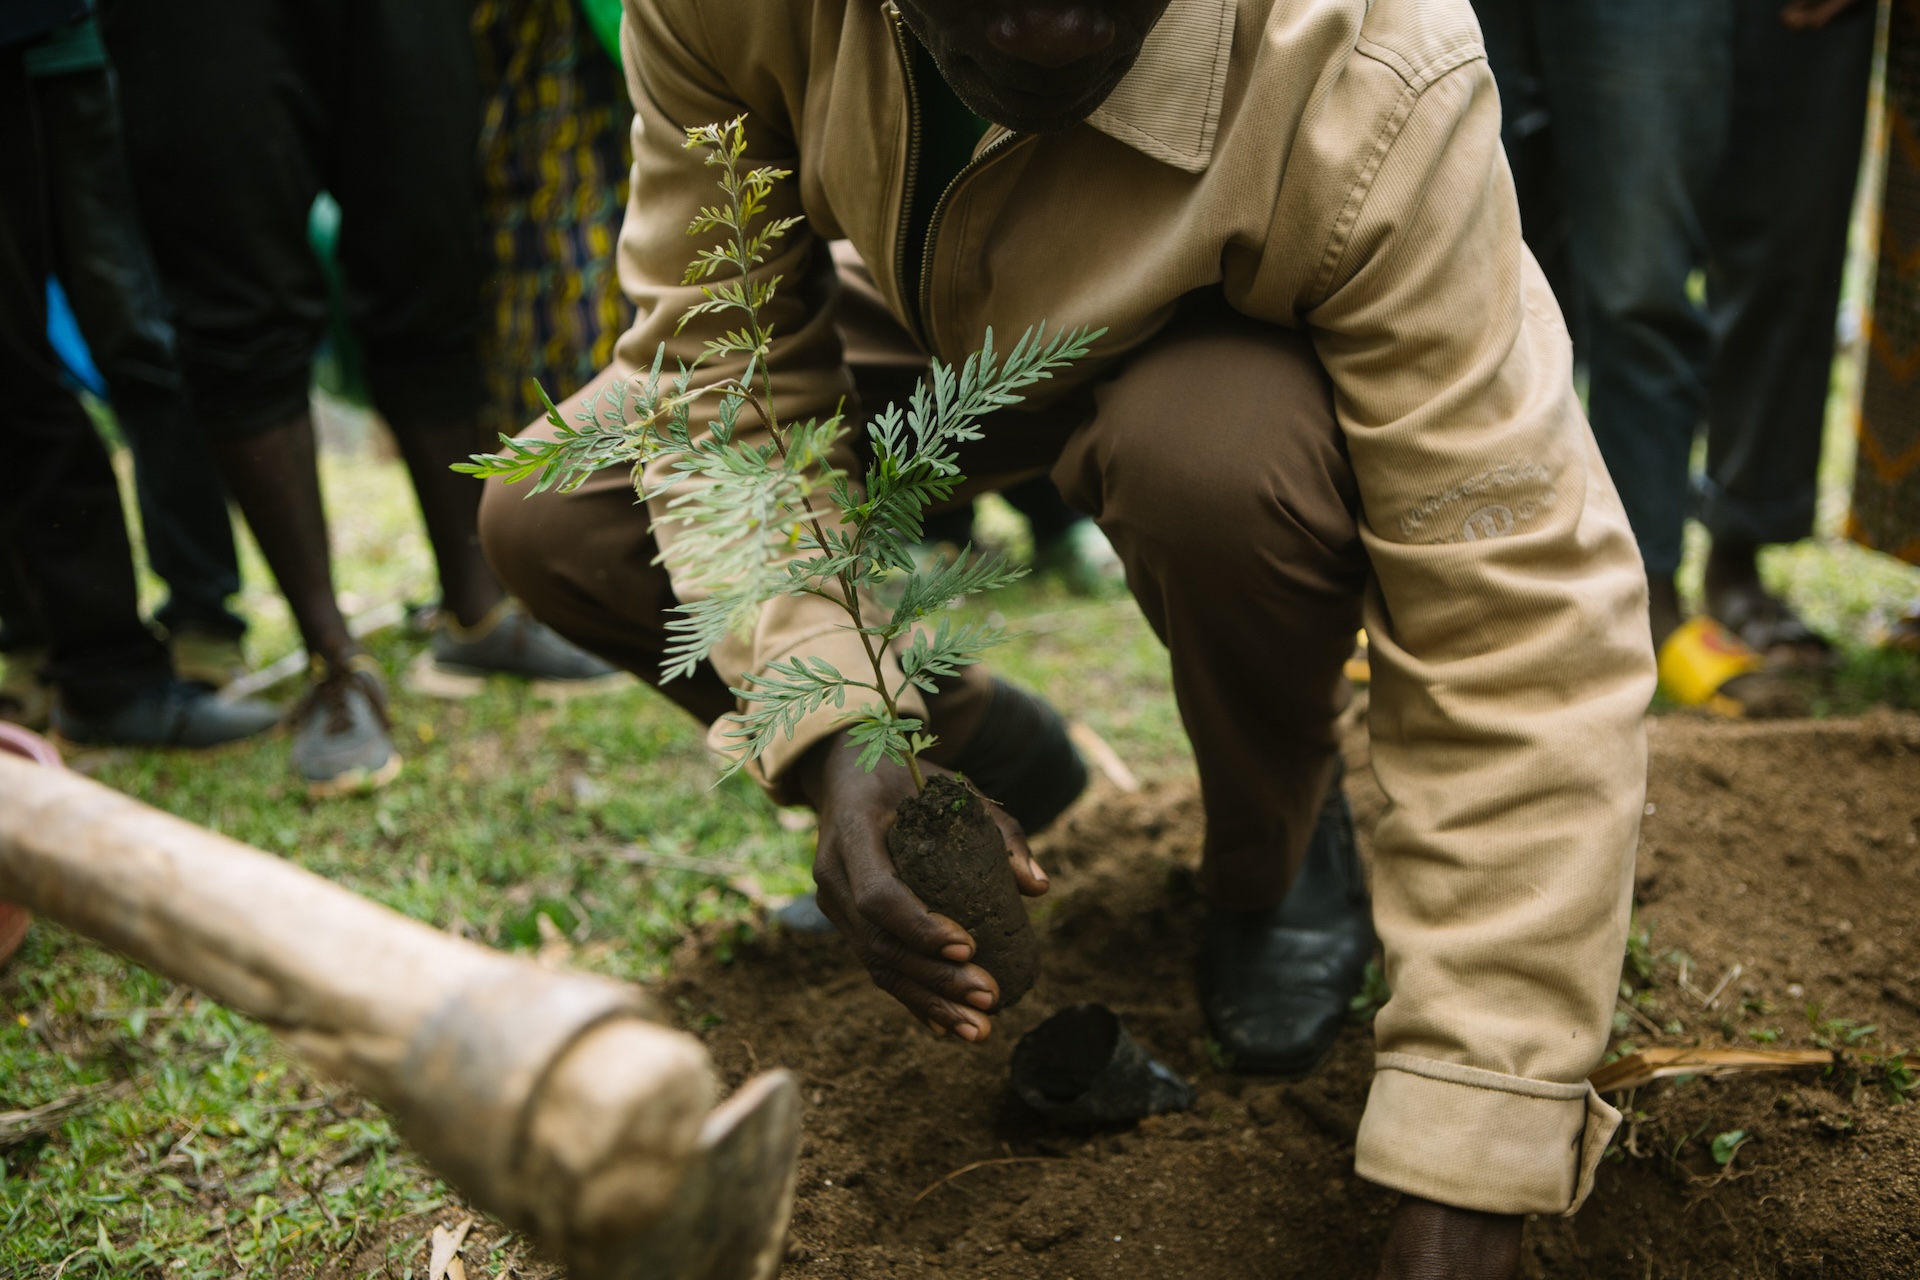 Planting a tree in the newly dug hole